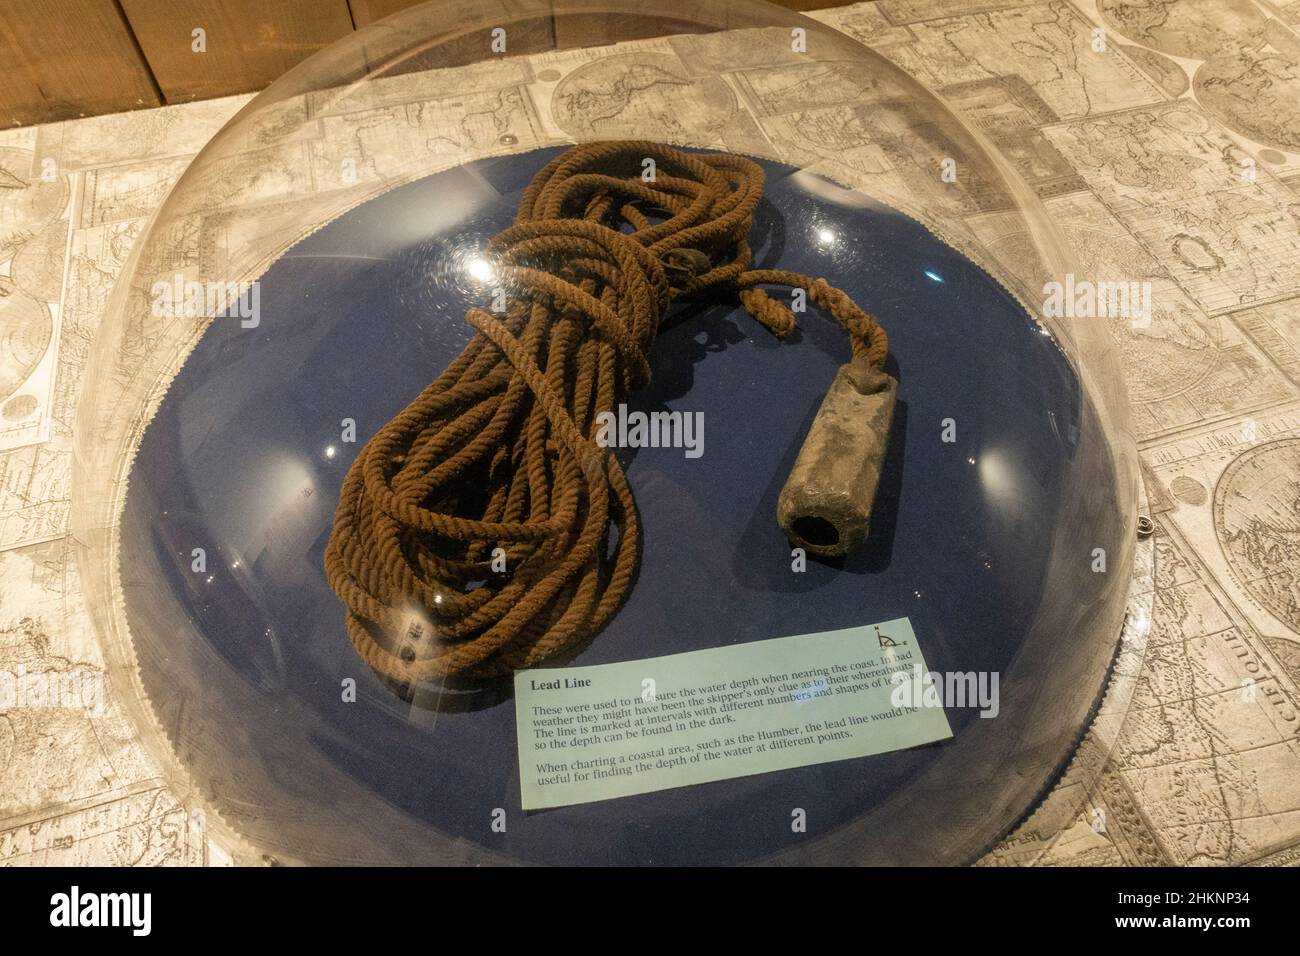 A lead line used to measuire water depth on display in the Grimsby Fishing Heritage Centre, Grimsby, UK. Stock Photo